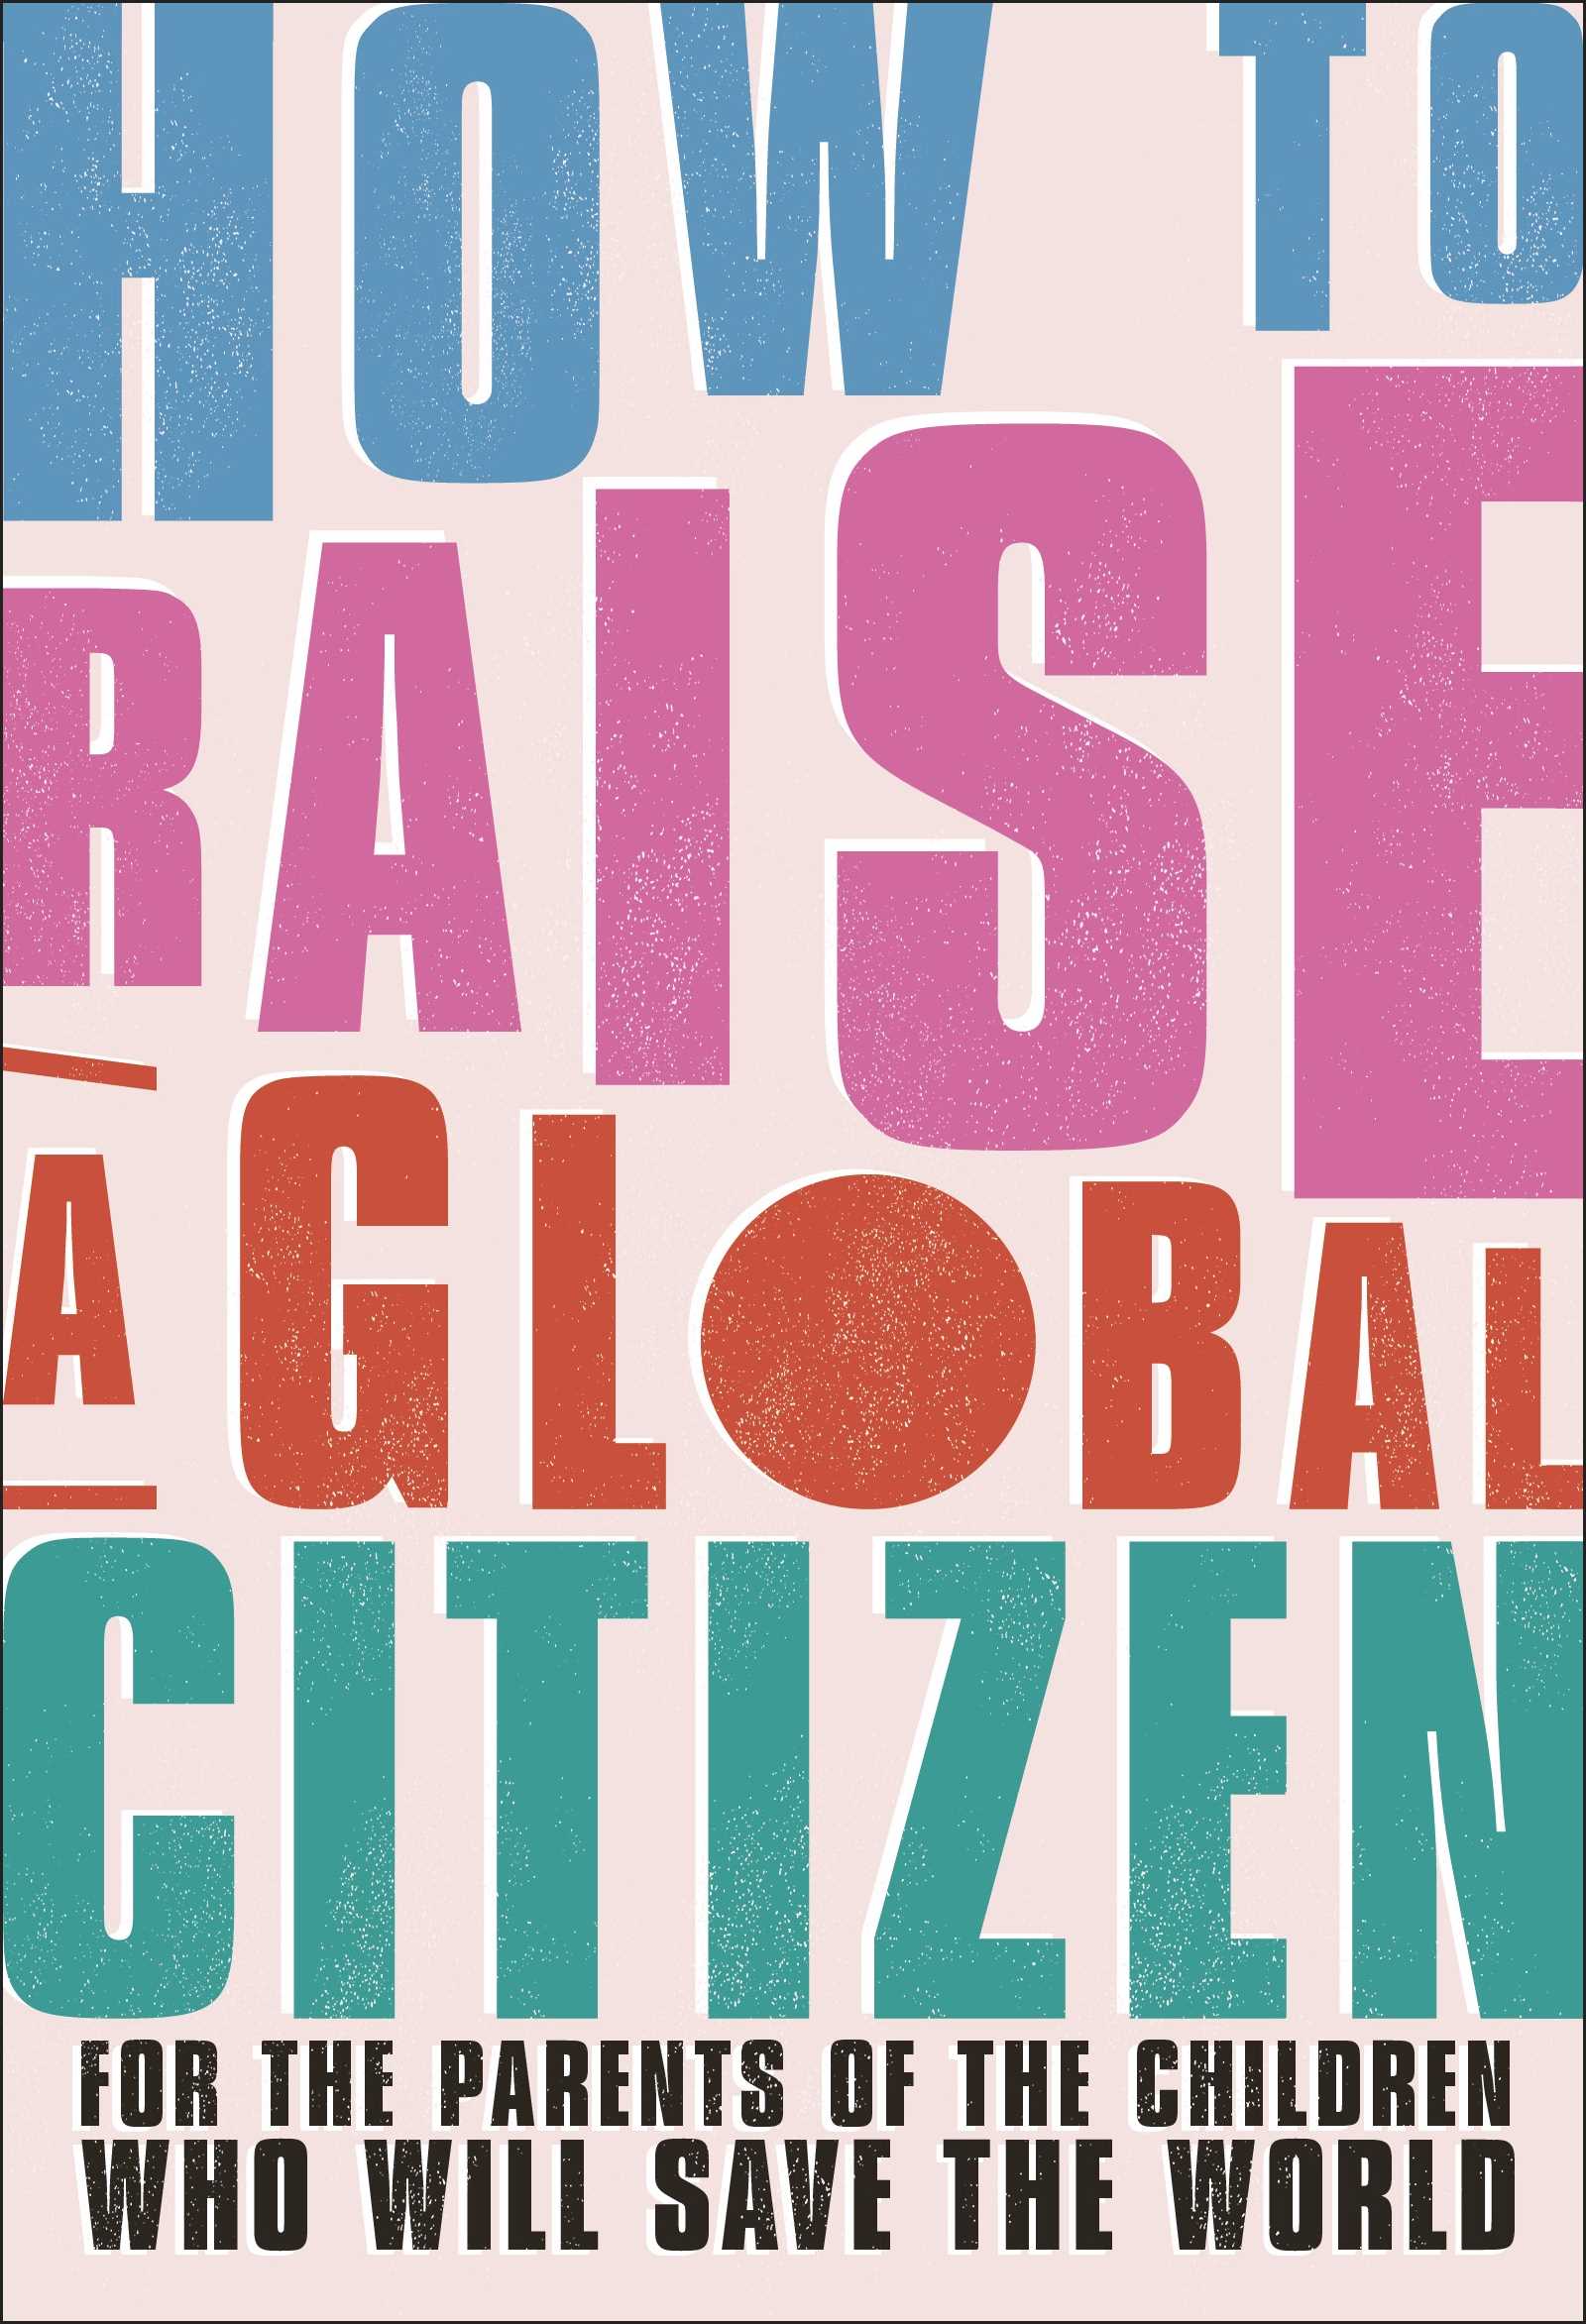 How to Raise a Global Citizen